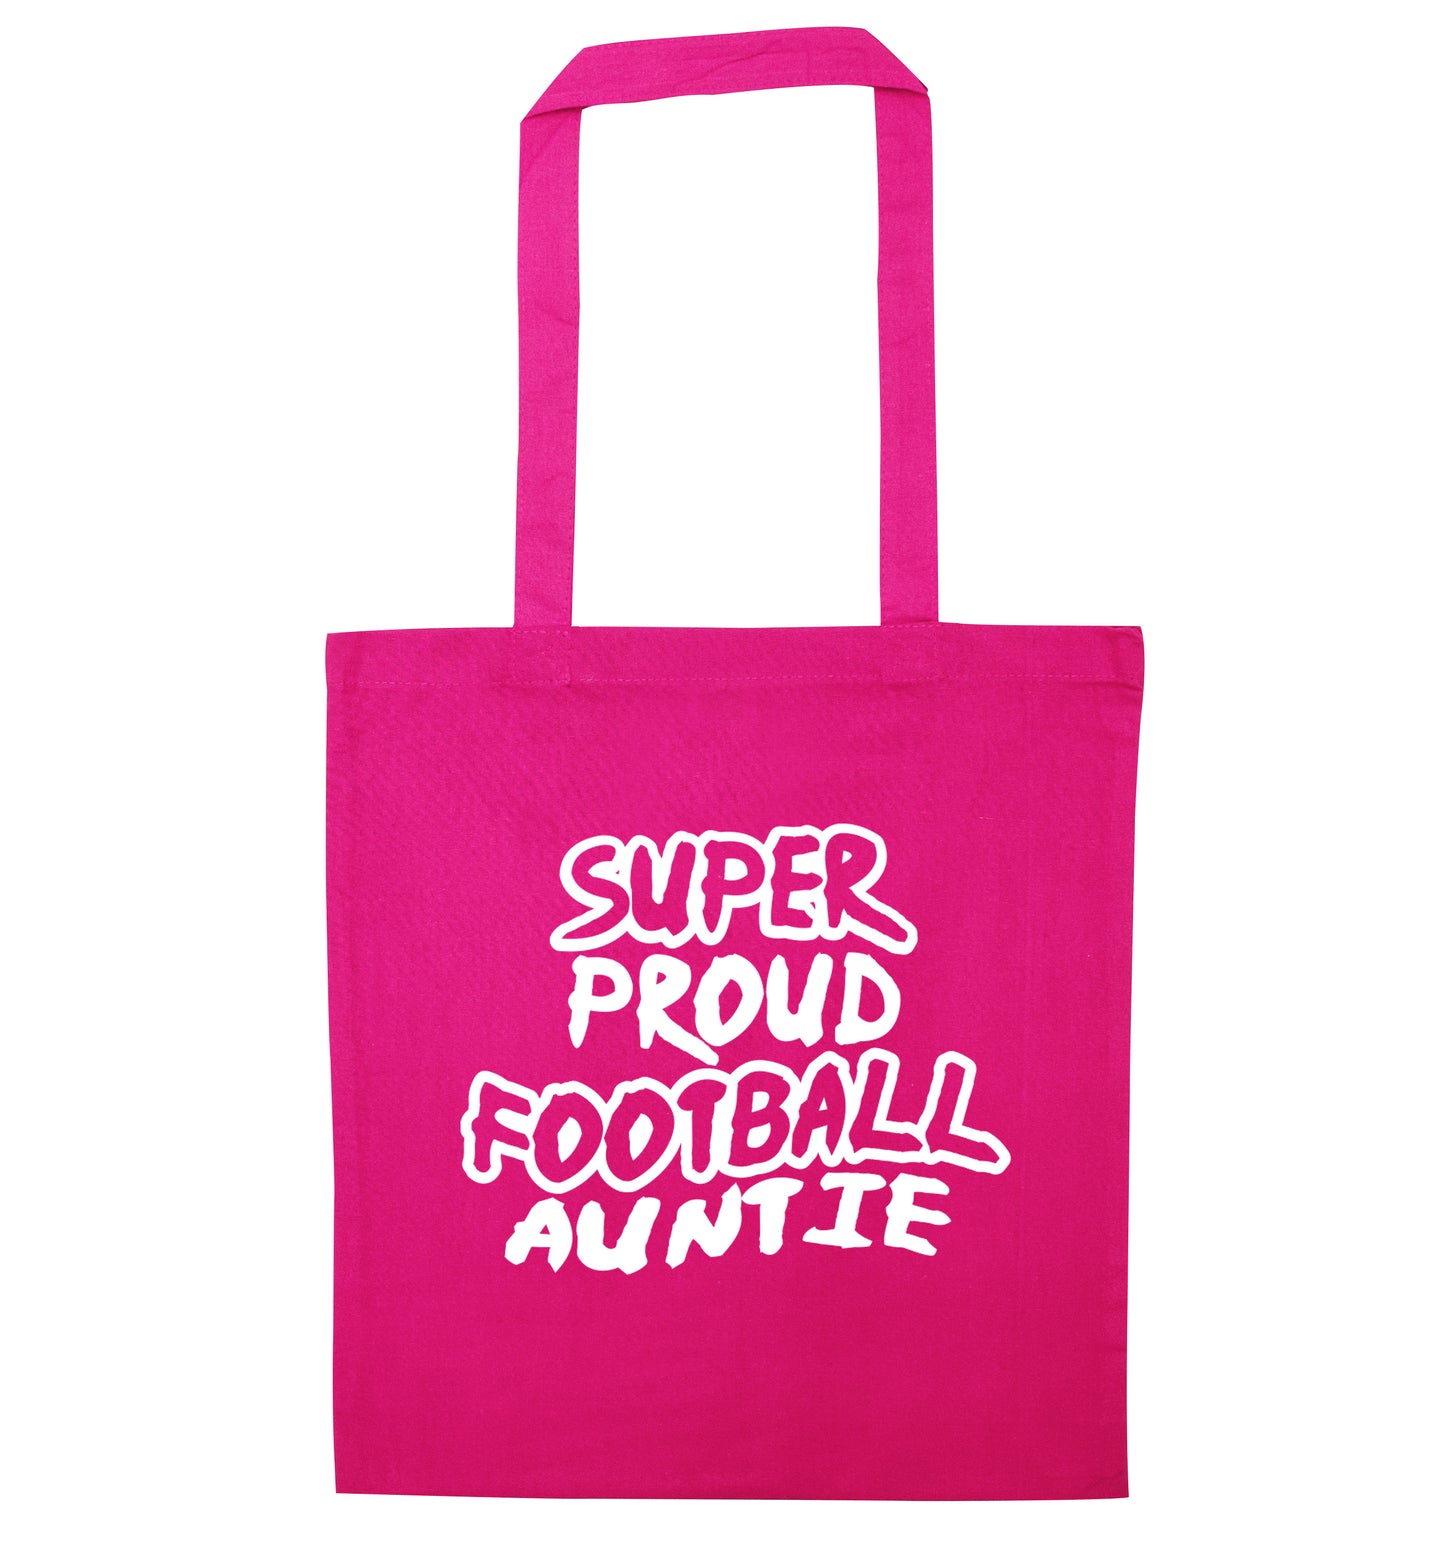 Super proud football auntie pink tote bag